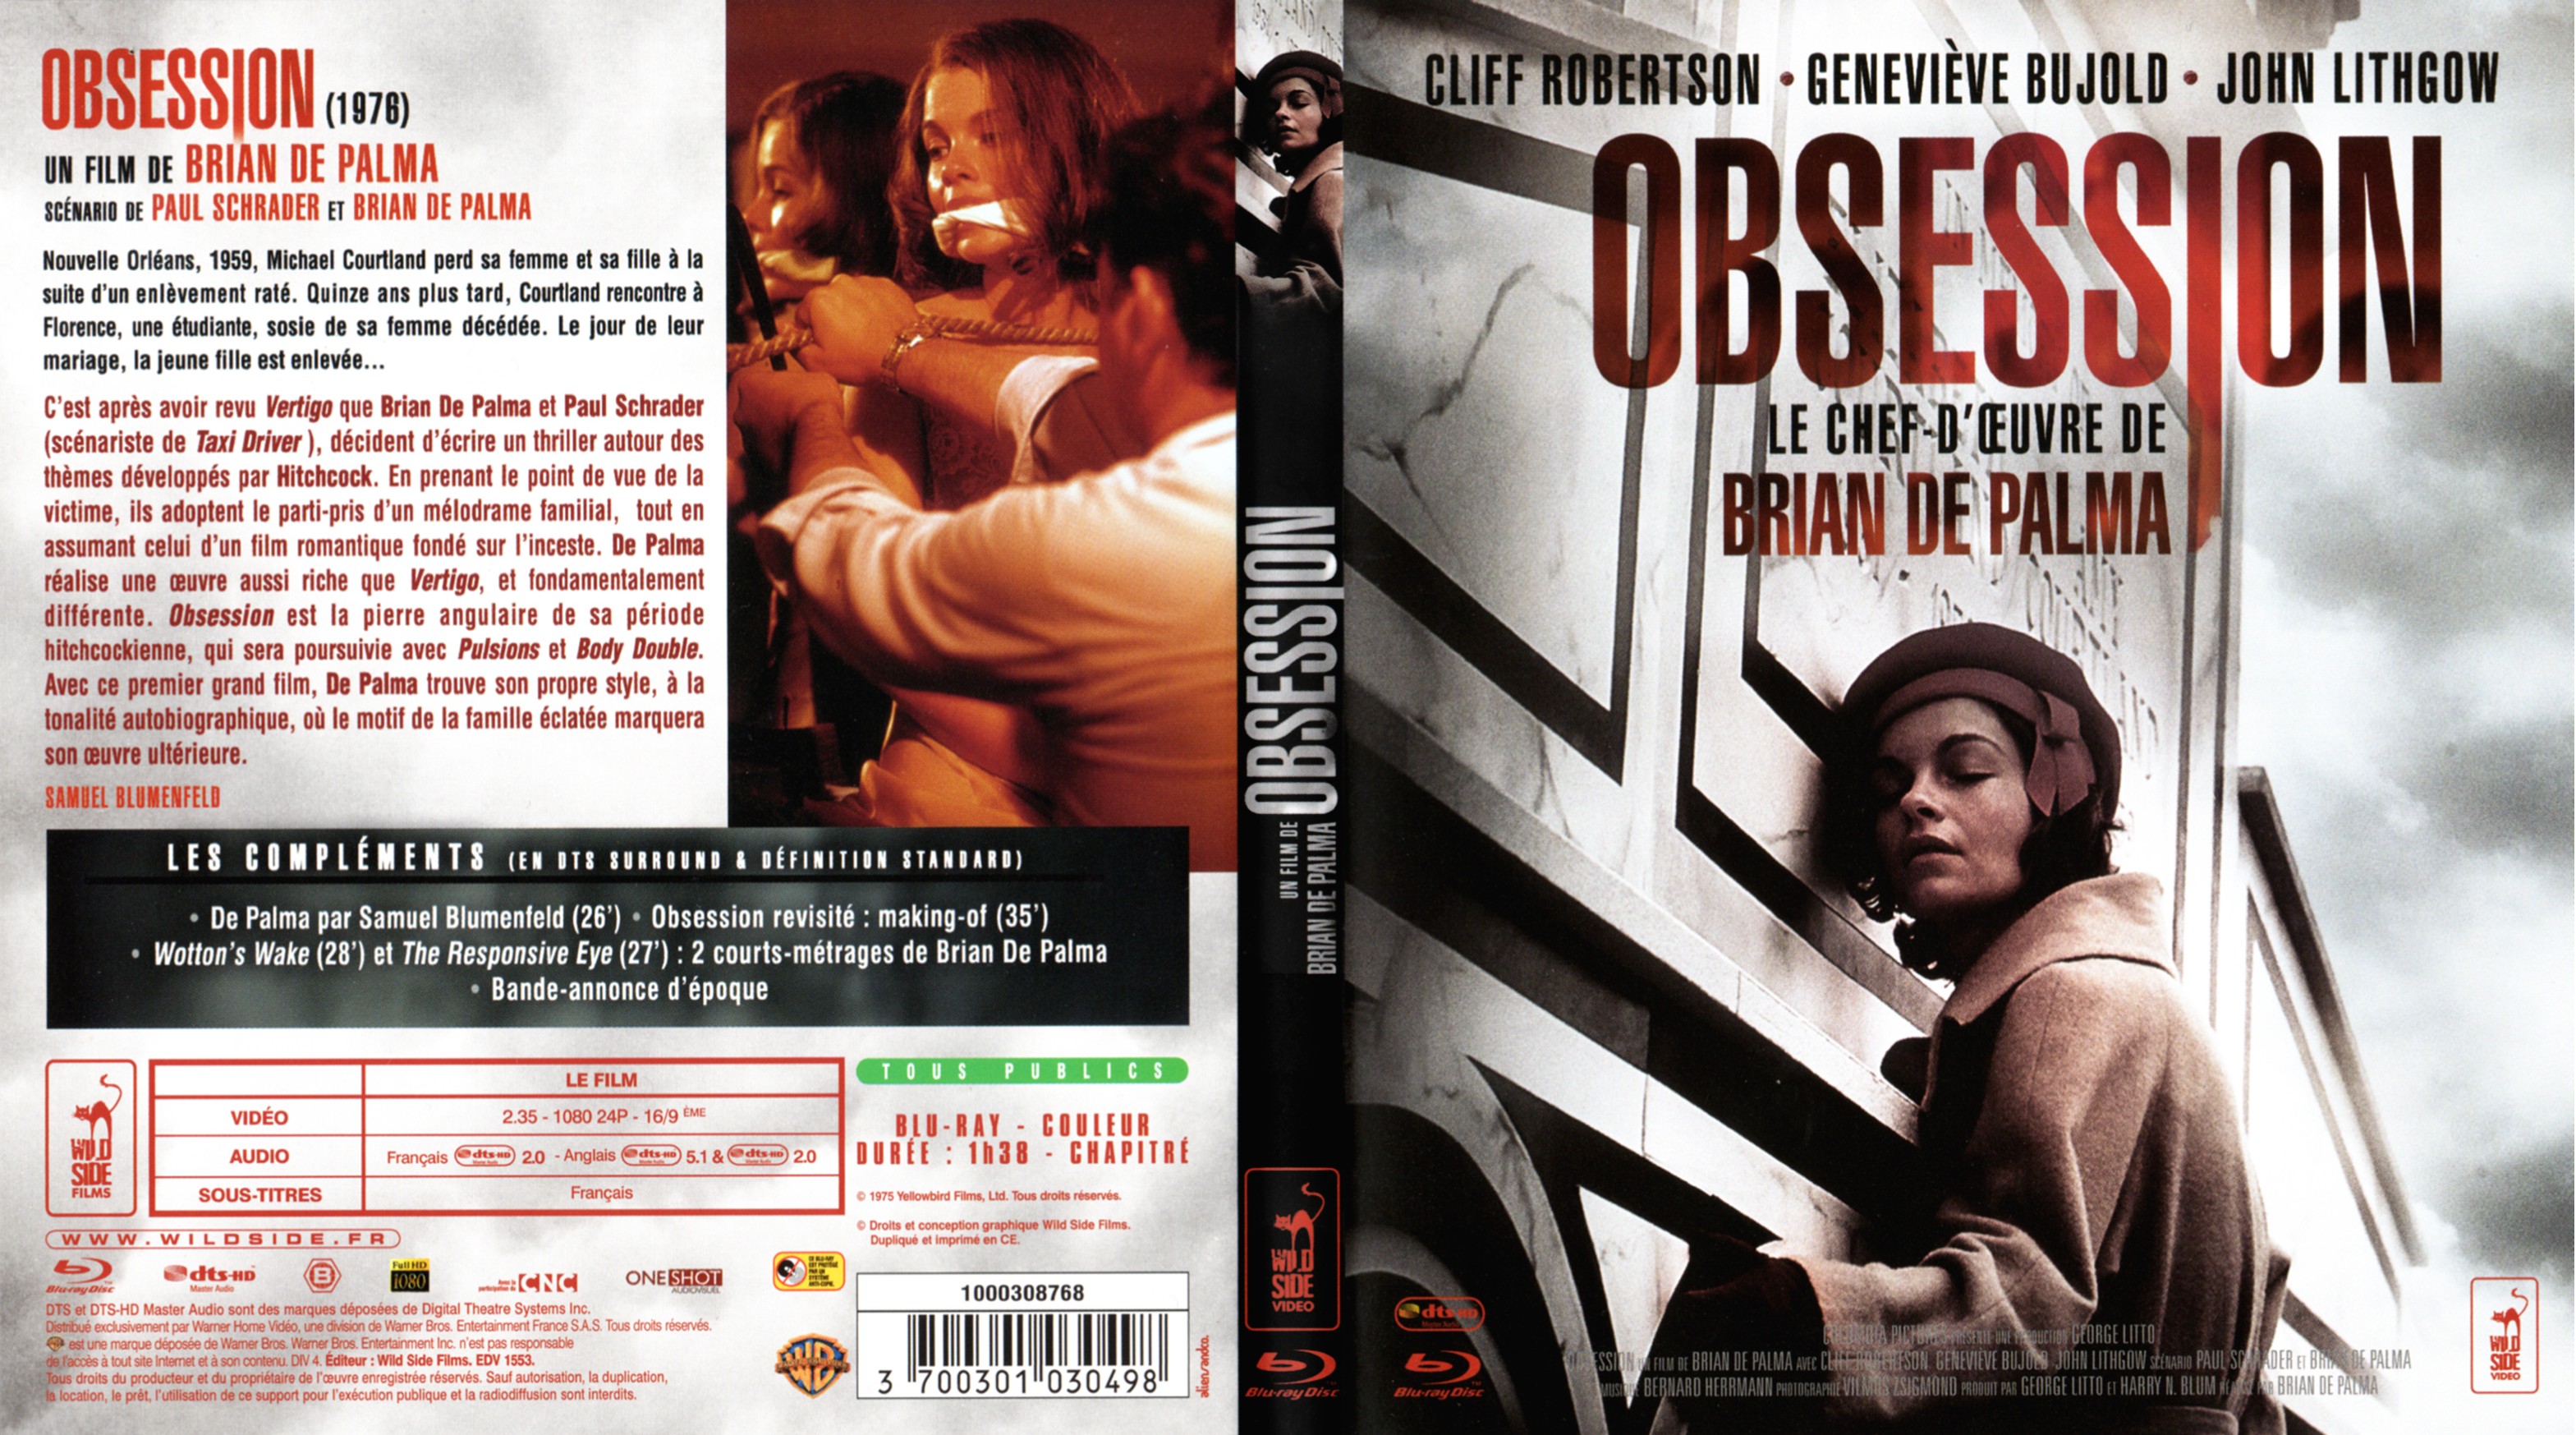 Jaquette DVD Obsession (BLU-RAY)